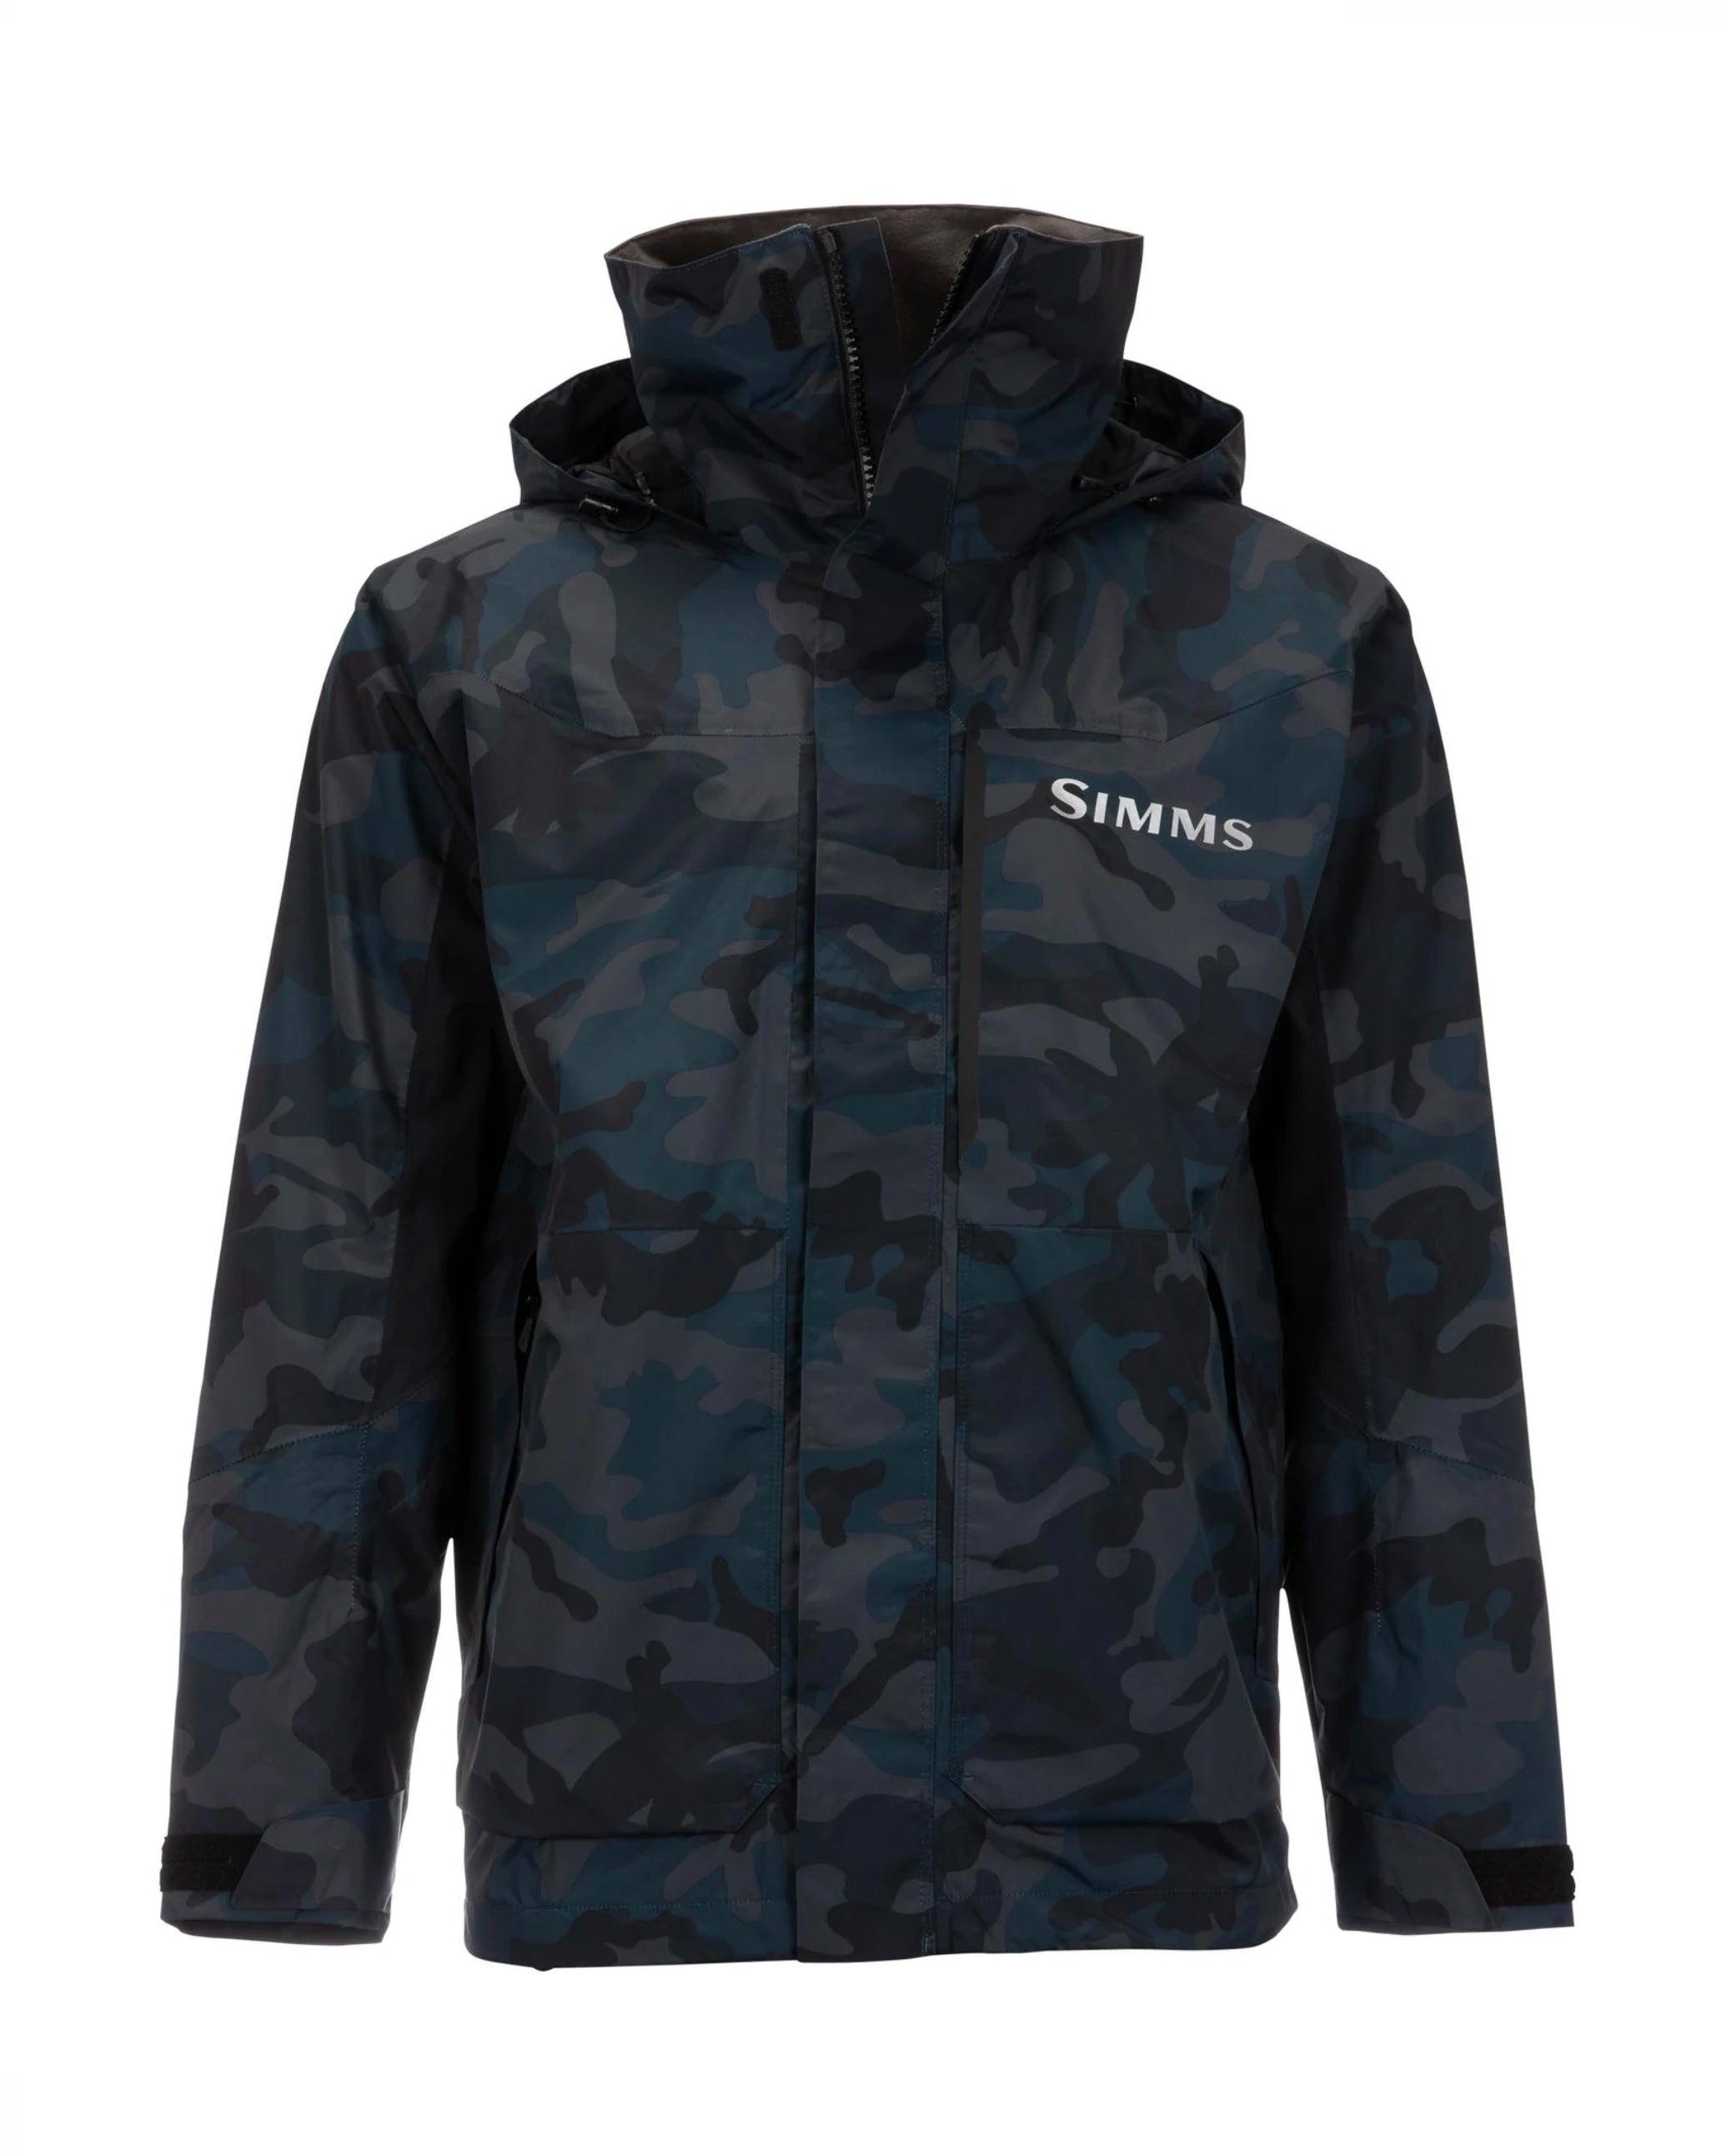 Simms Men's Challenger Fishing Jacket / Woodland Camo Storm - Andy Thornal  Company